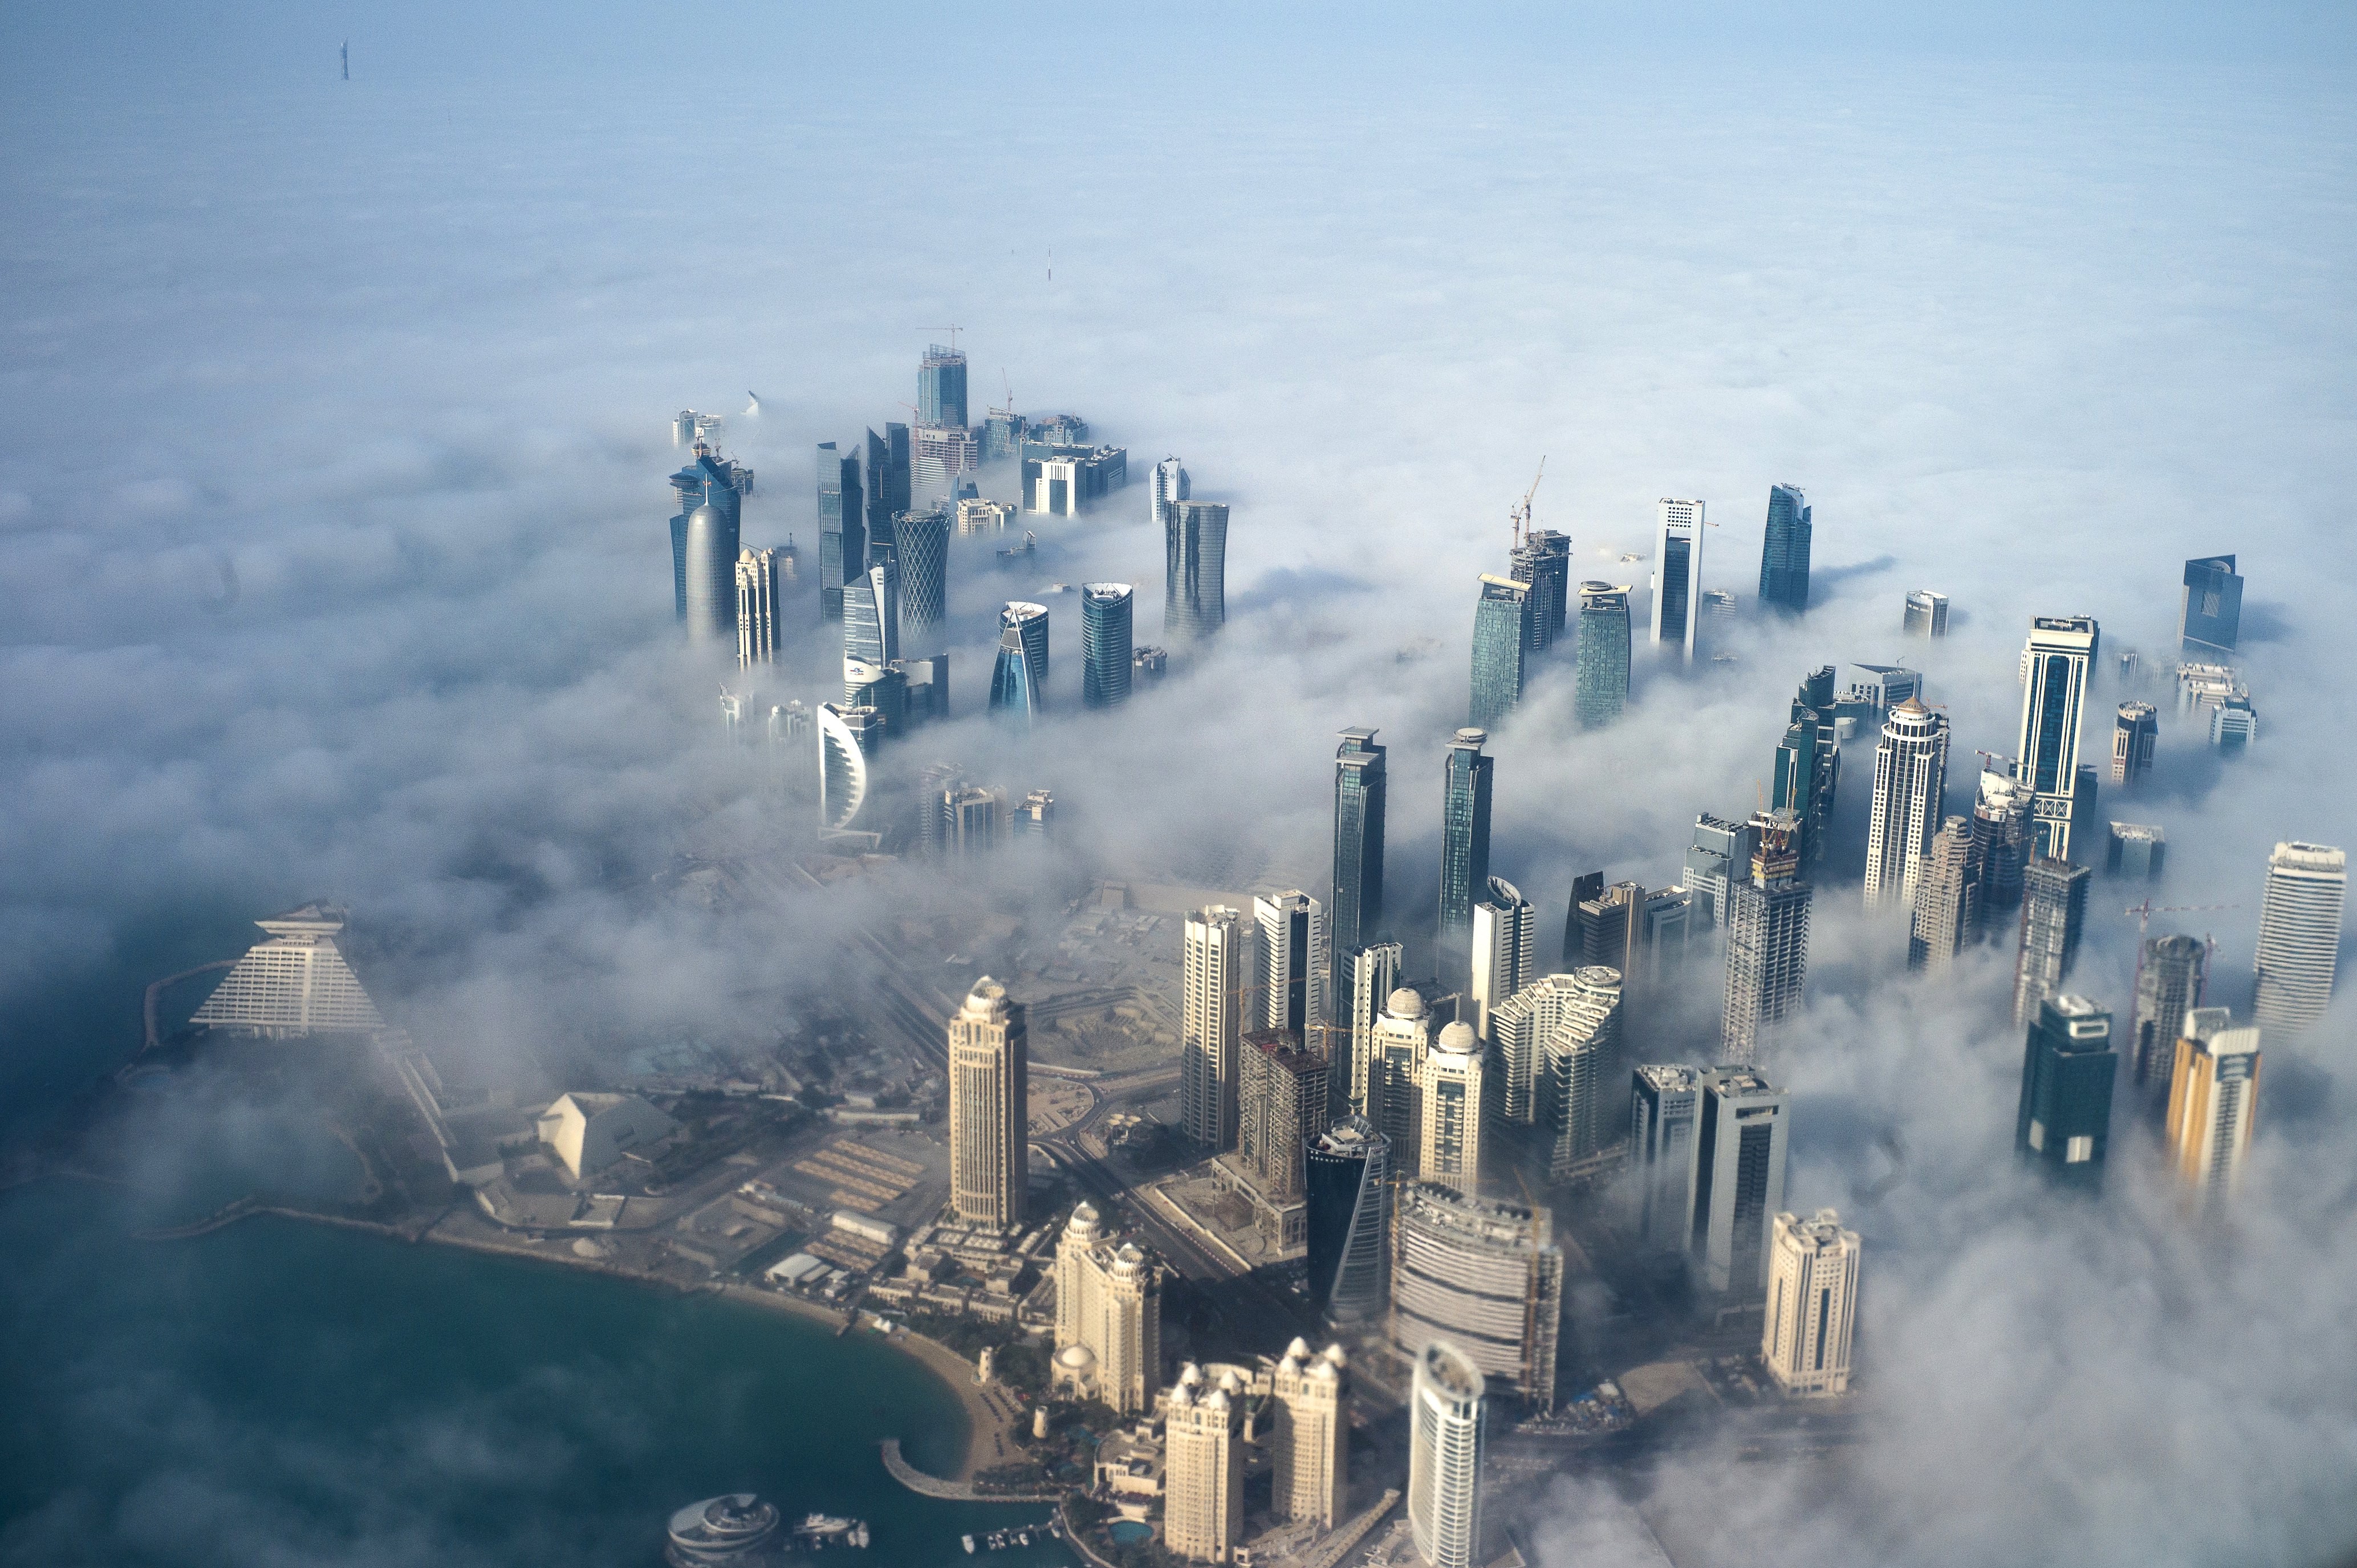 High-rise buildings emerge through fog covering the skyline of Doha, a city where traffic, a lack of pavements for walking and cycle lanes add to daily stresses. Photo: EPA